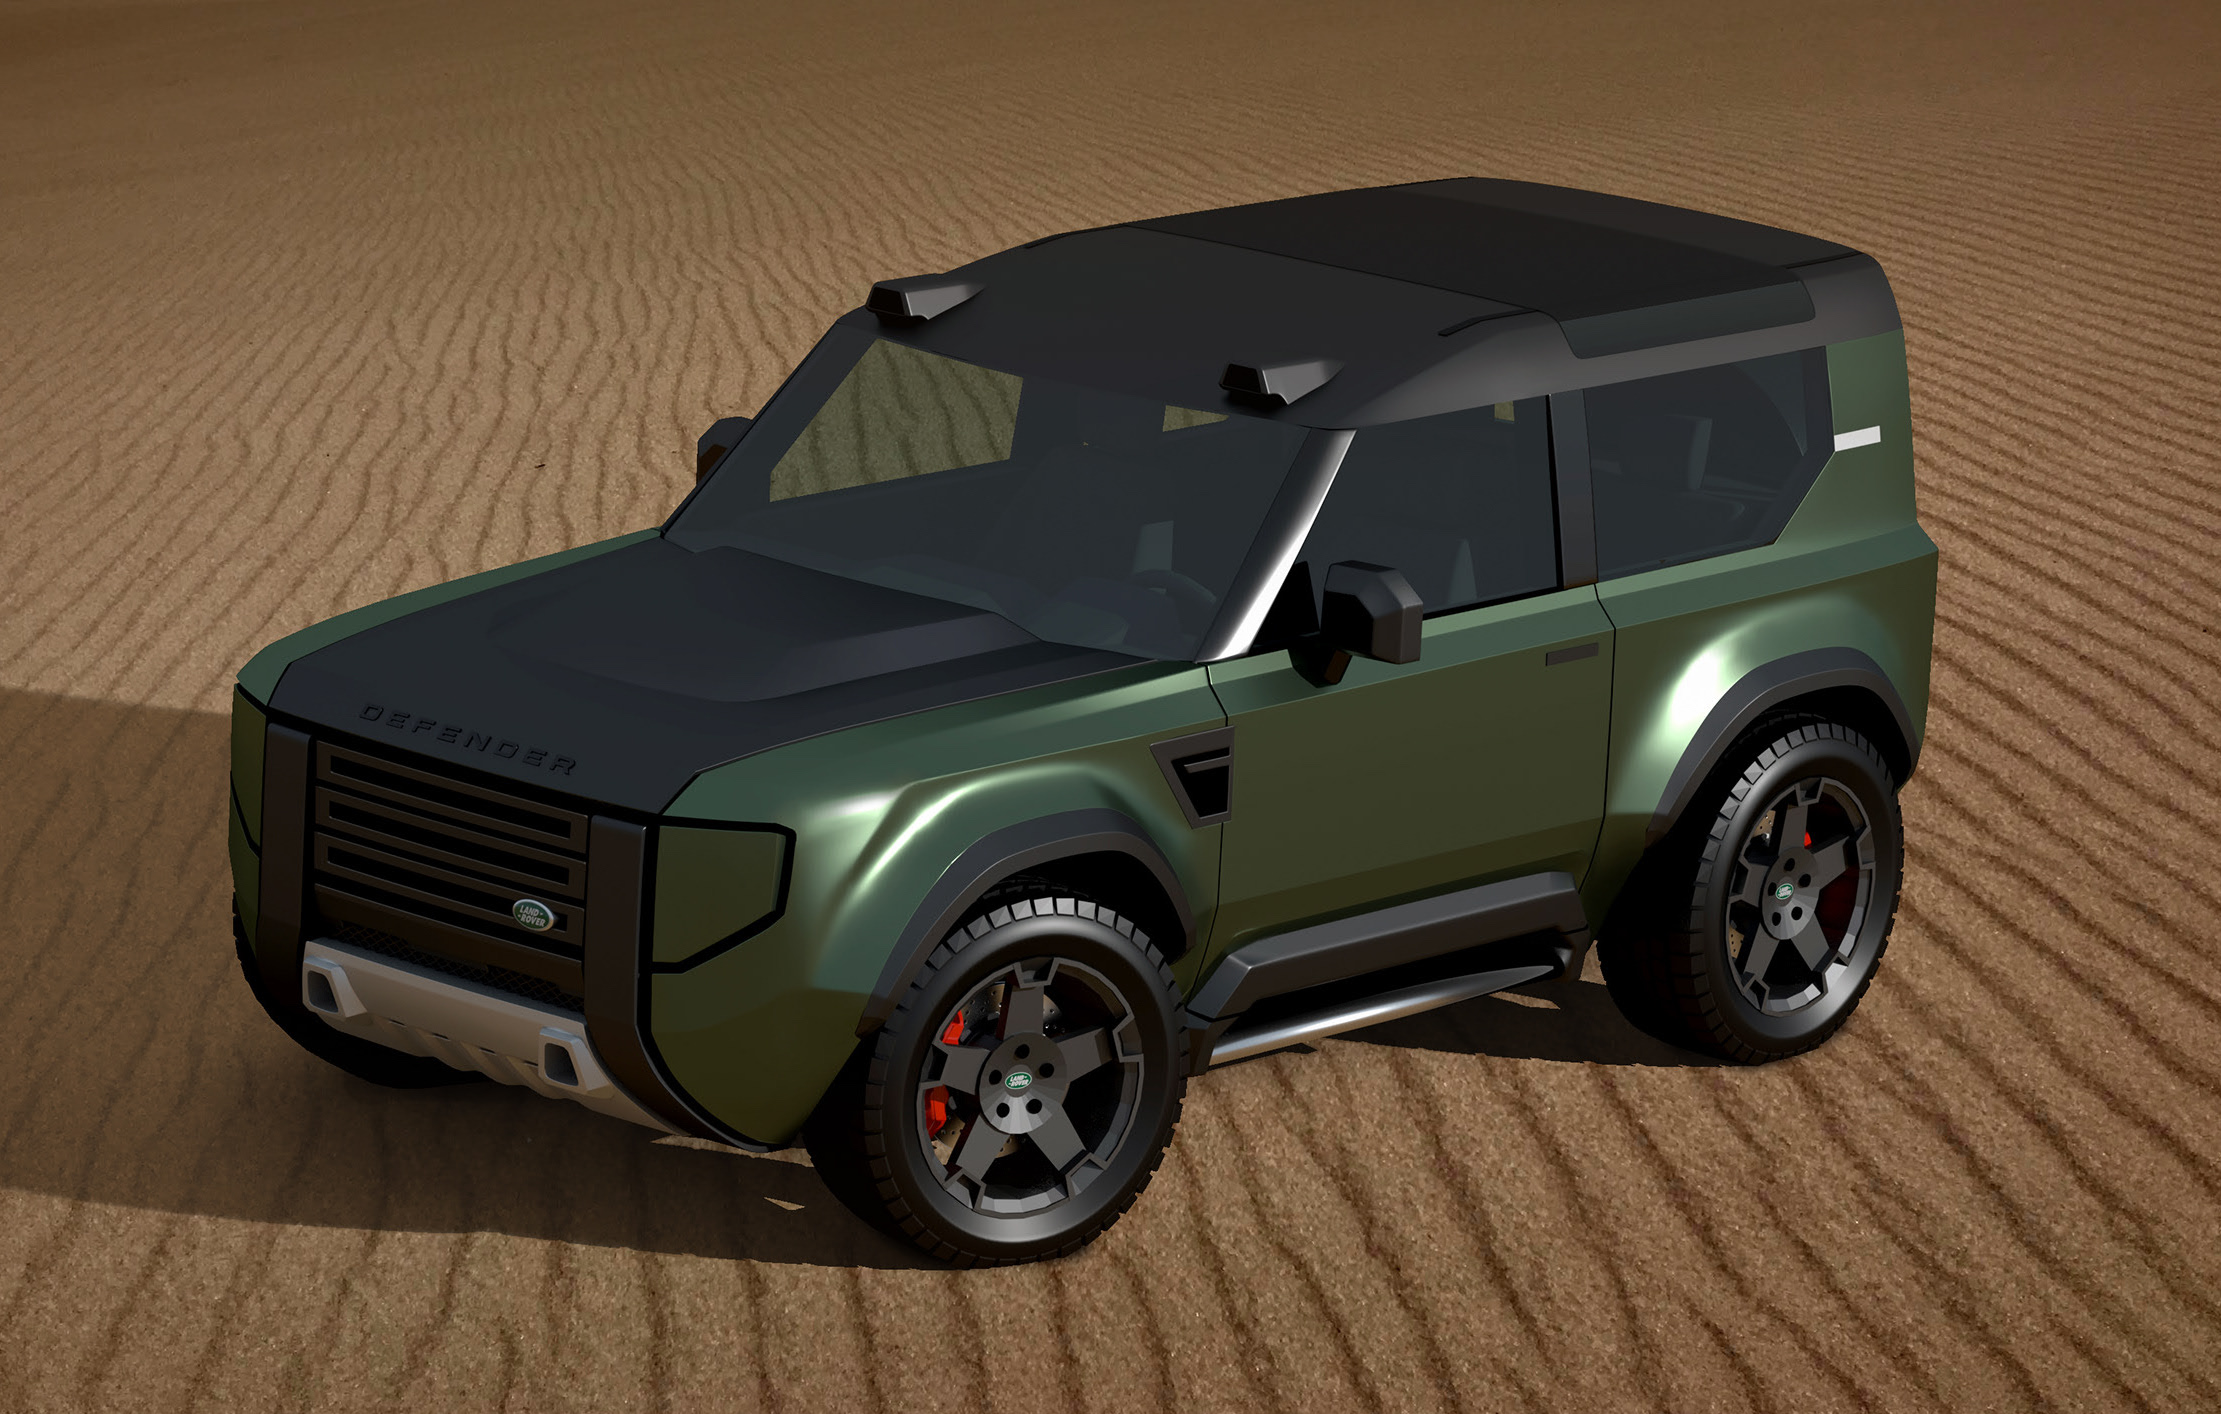 Baby Land Rover Defender envisioned, premium Jimny rival?